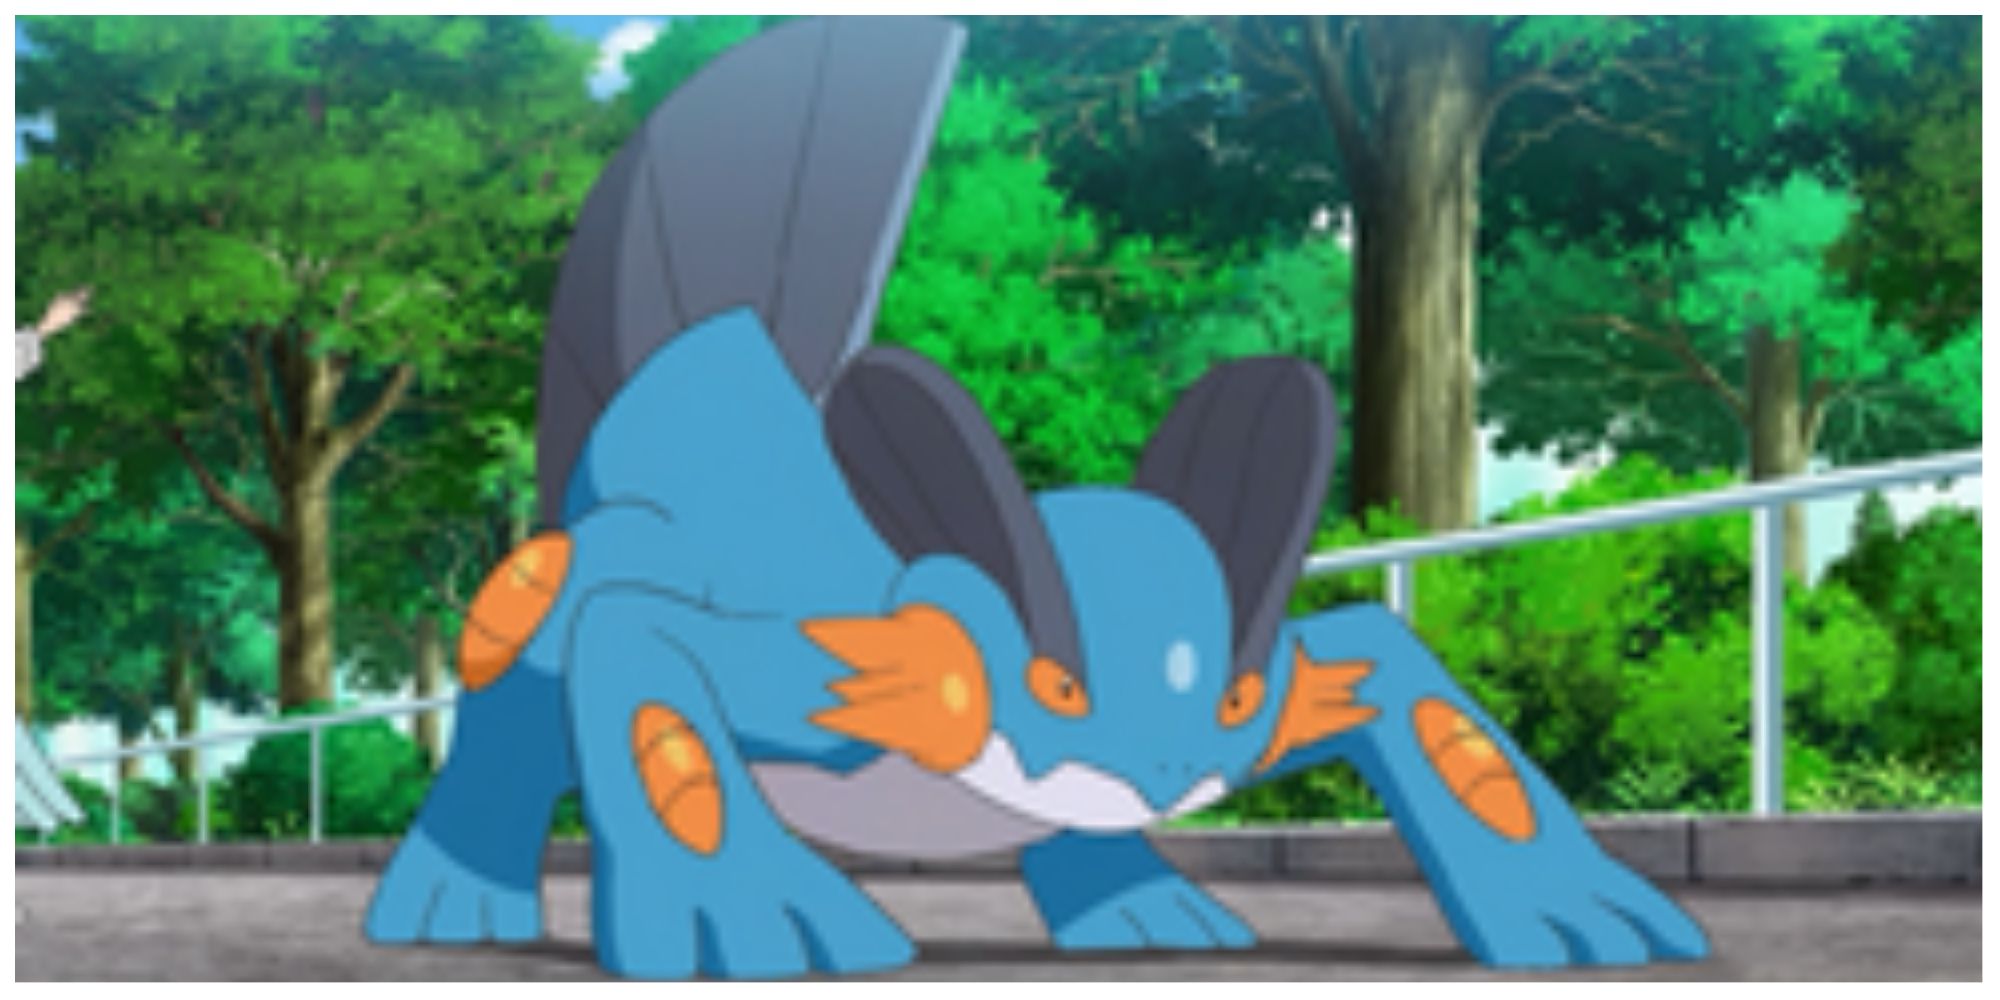 Champion Wallace's Swampert in the Pokémon anime.